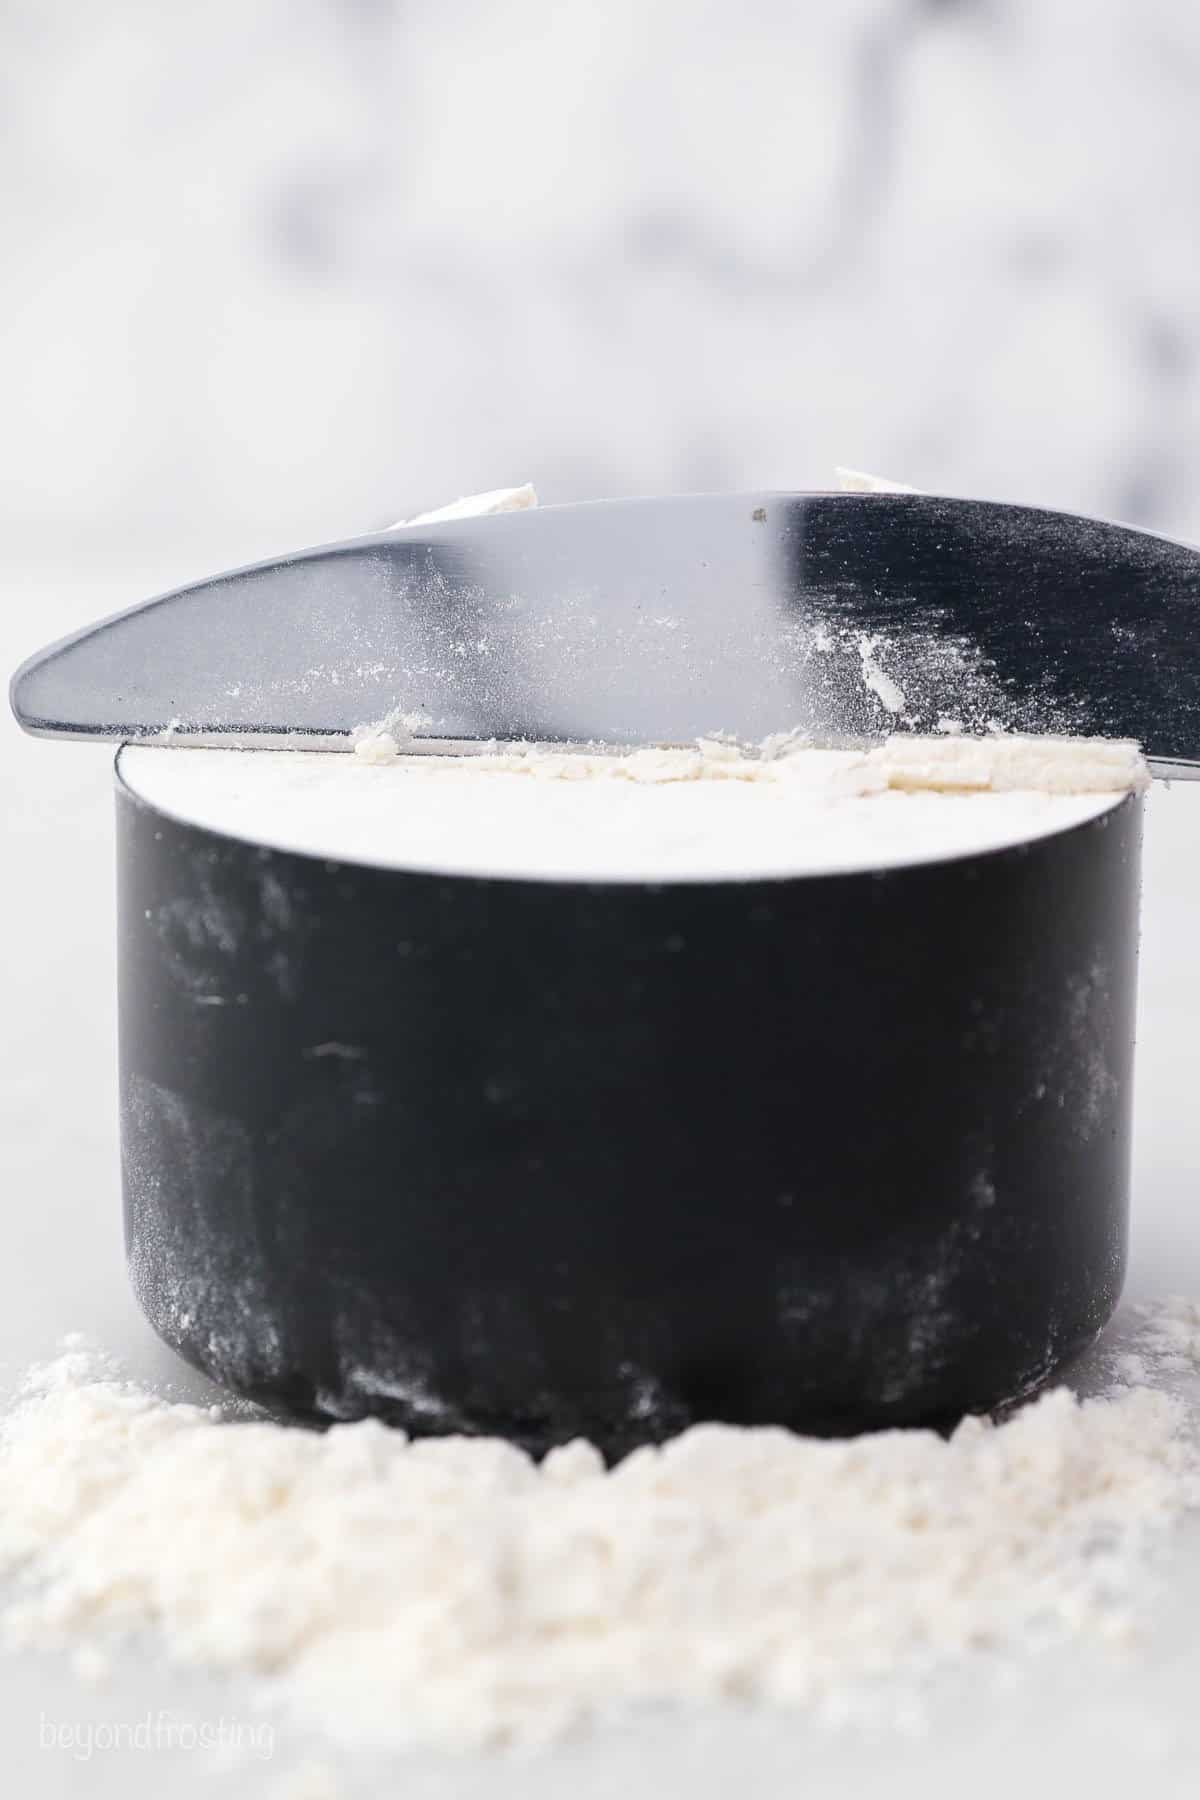 A butter knife leveling off a cup of spooned-in flour at the top